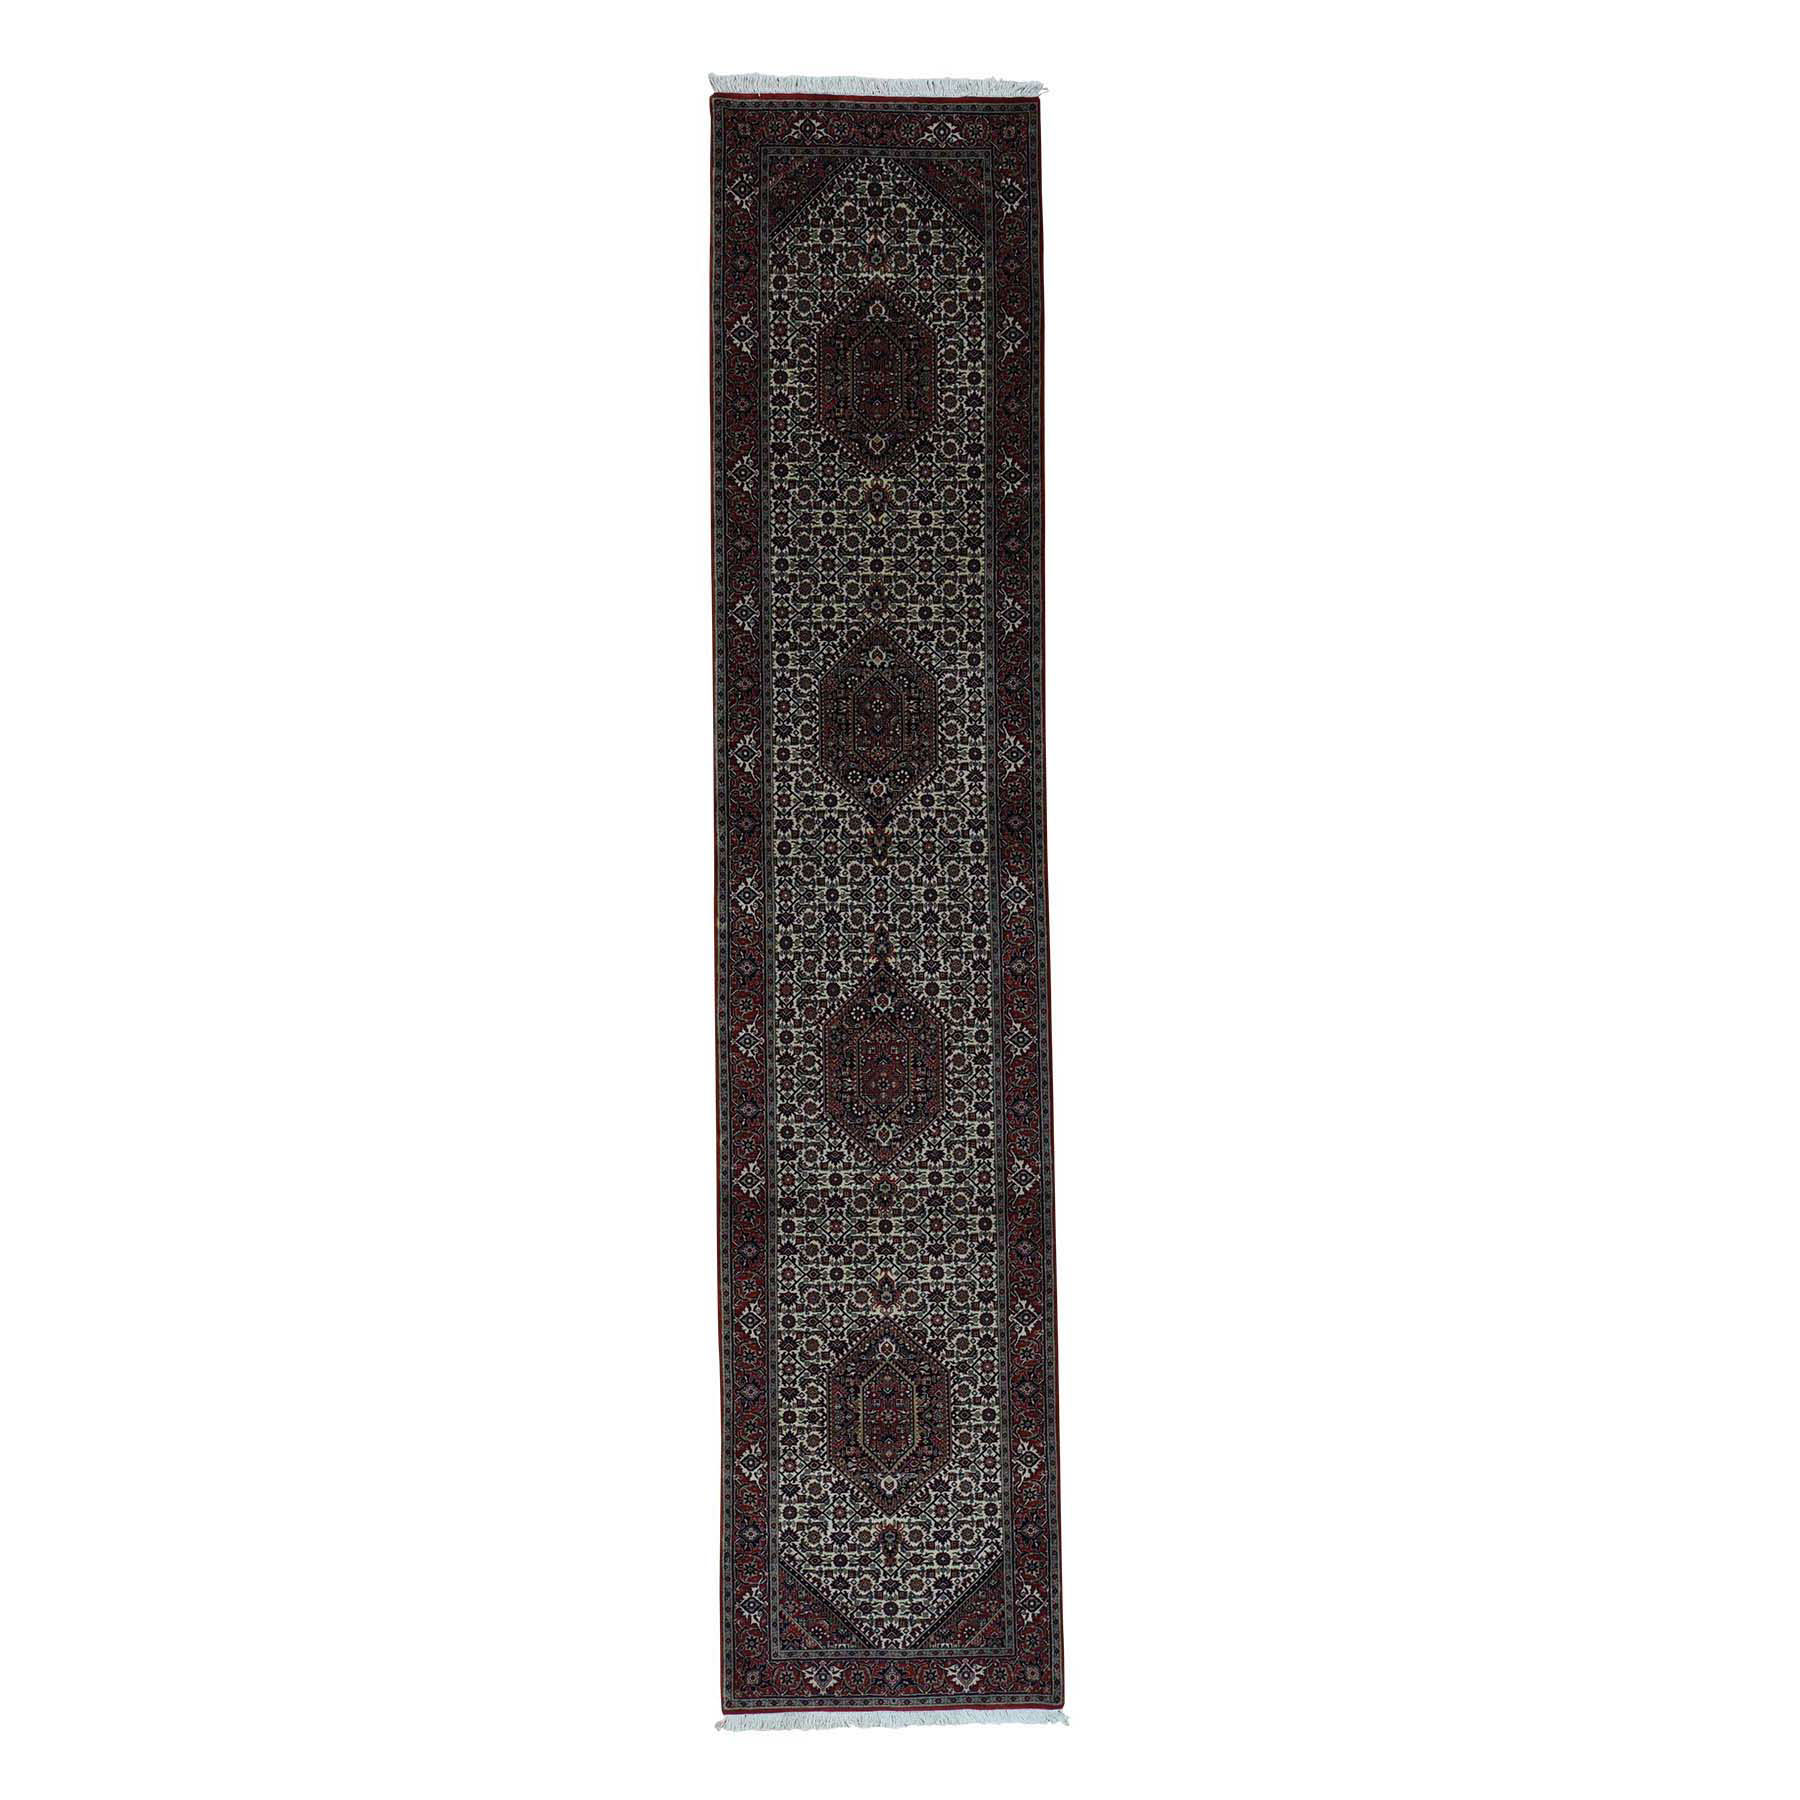 Persian Wool Transitional Medallion Hand Woven Oriental Rugs